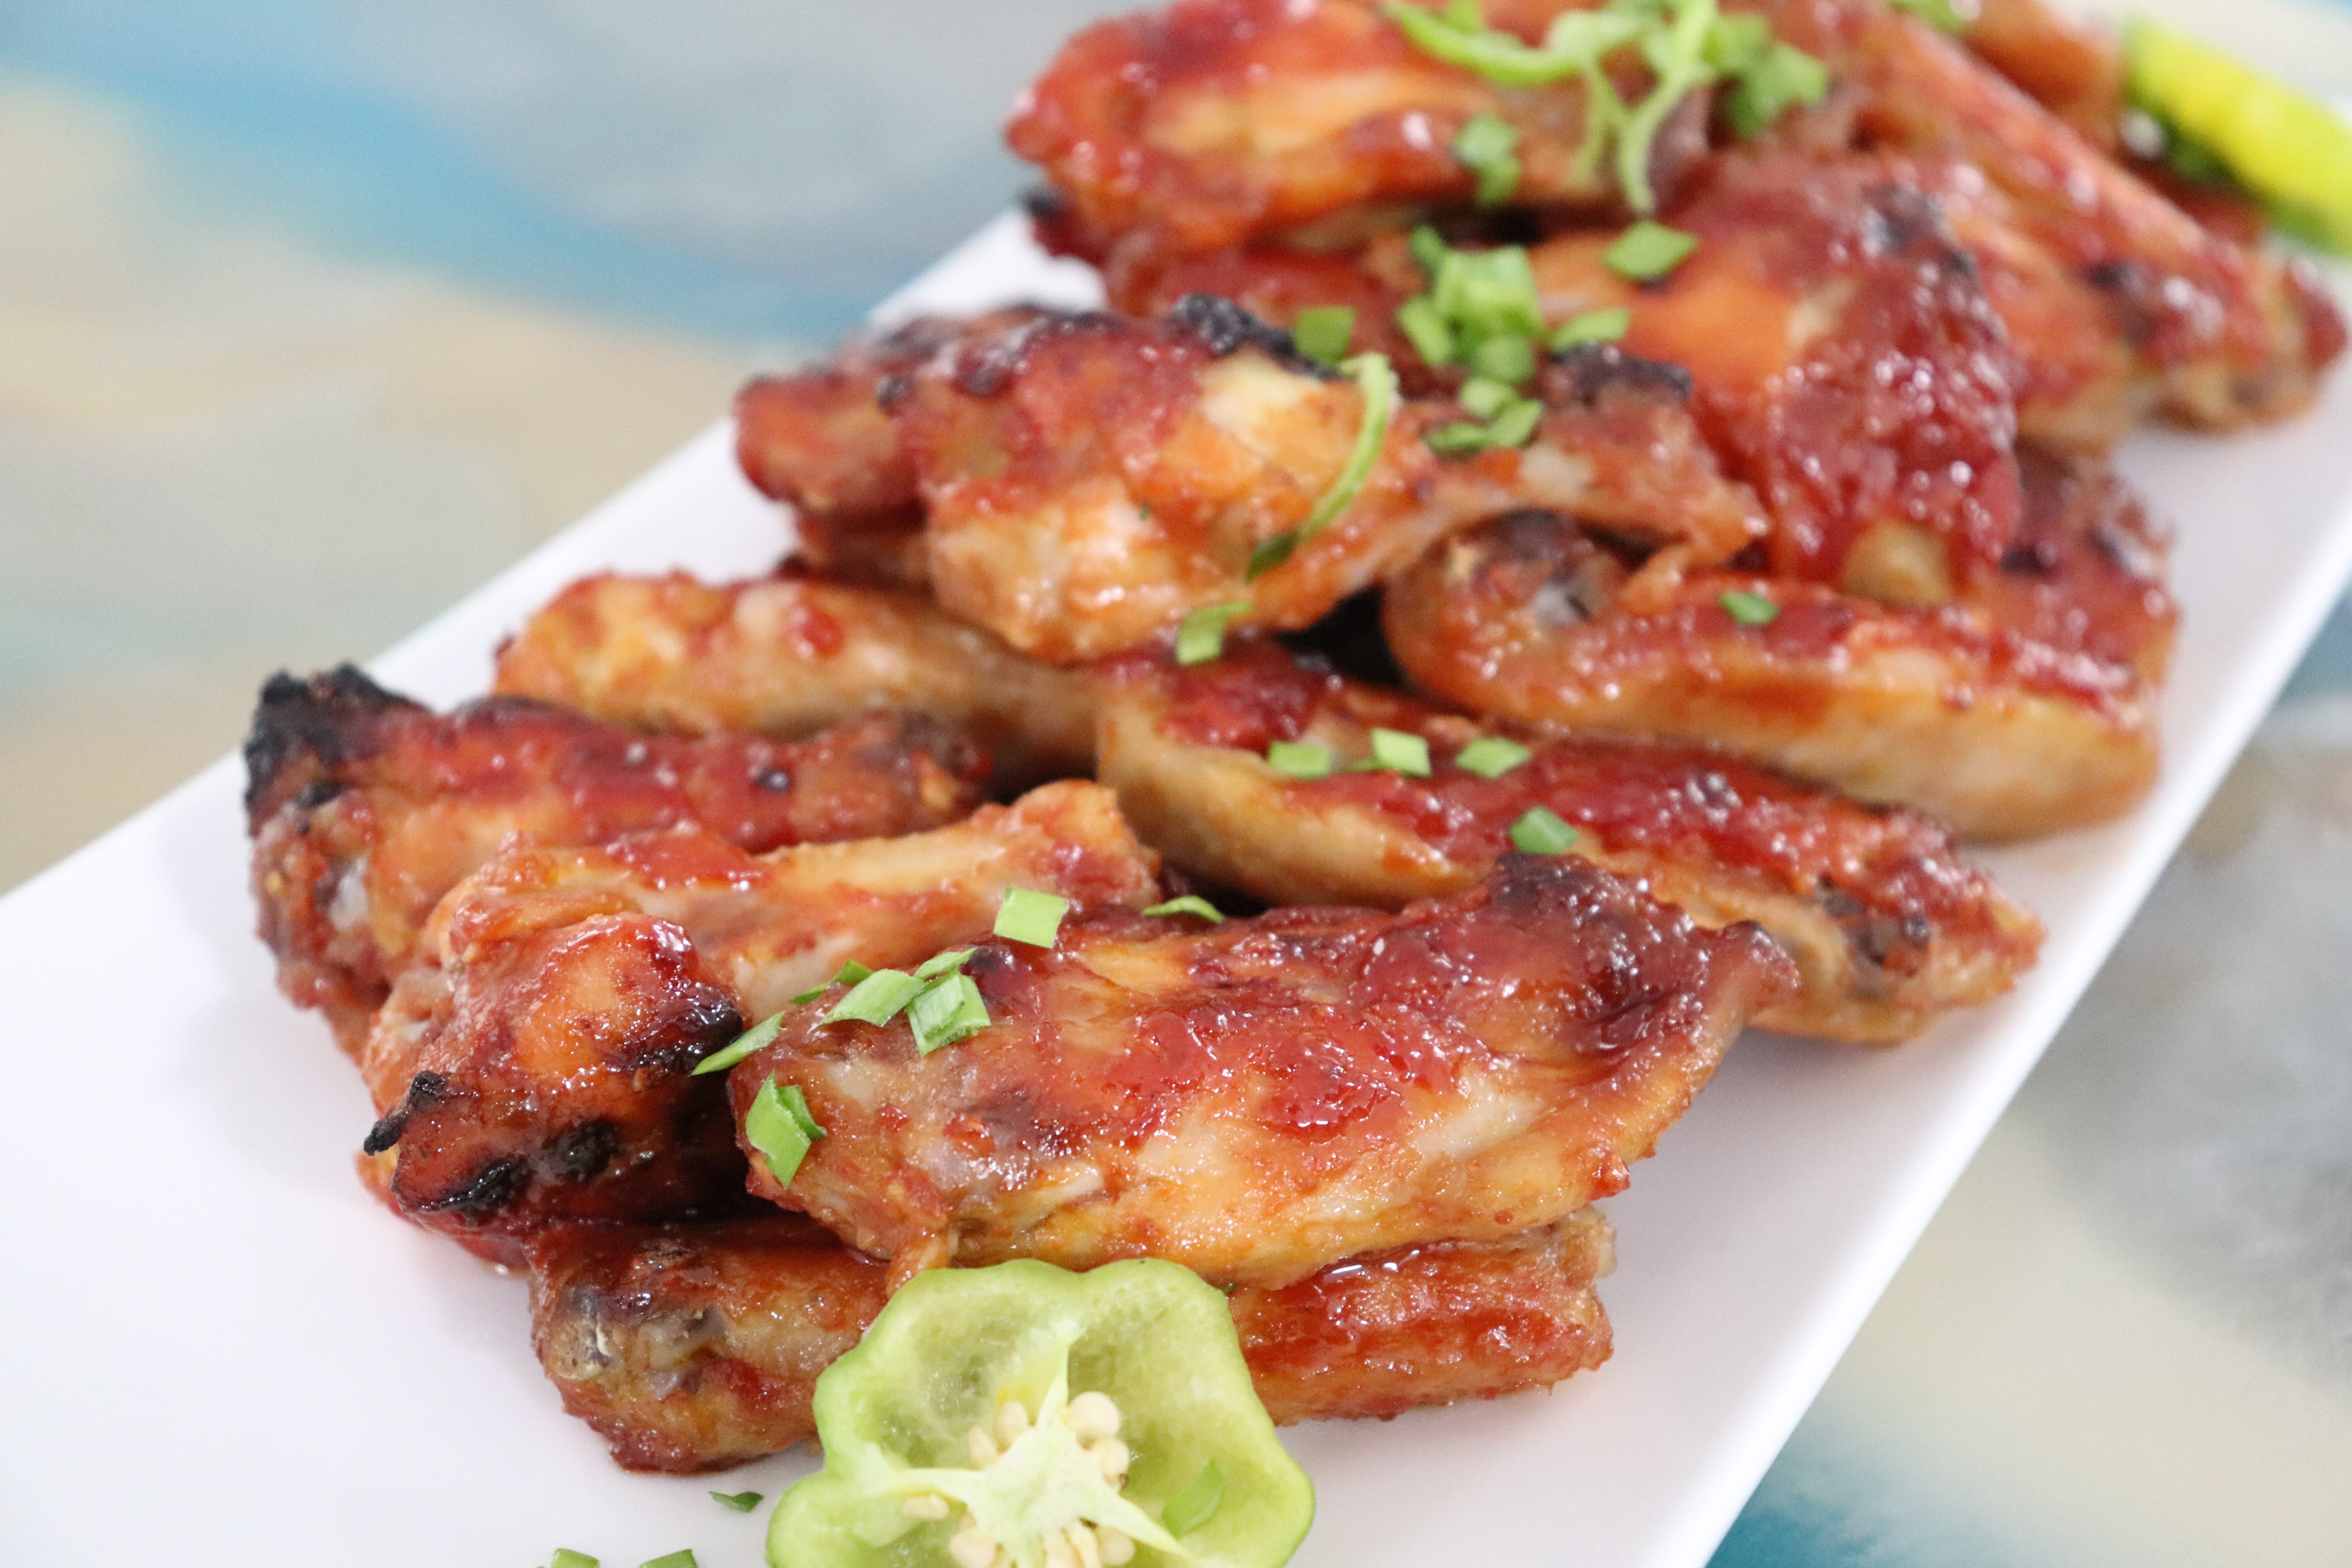 Sweet & Spicy Chicken Wings